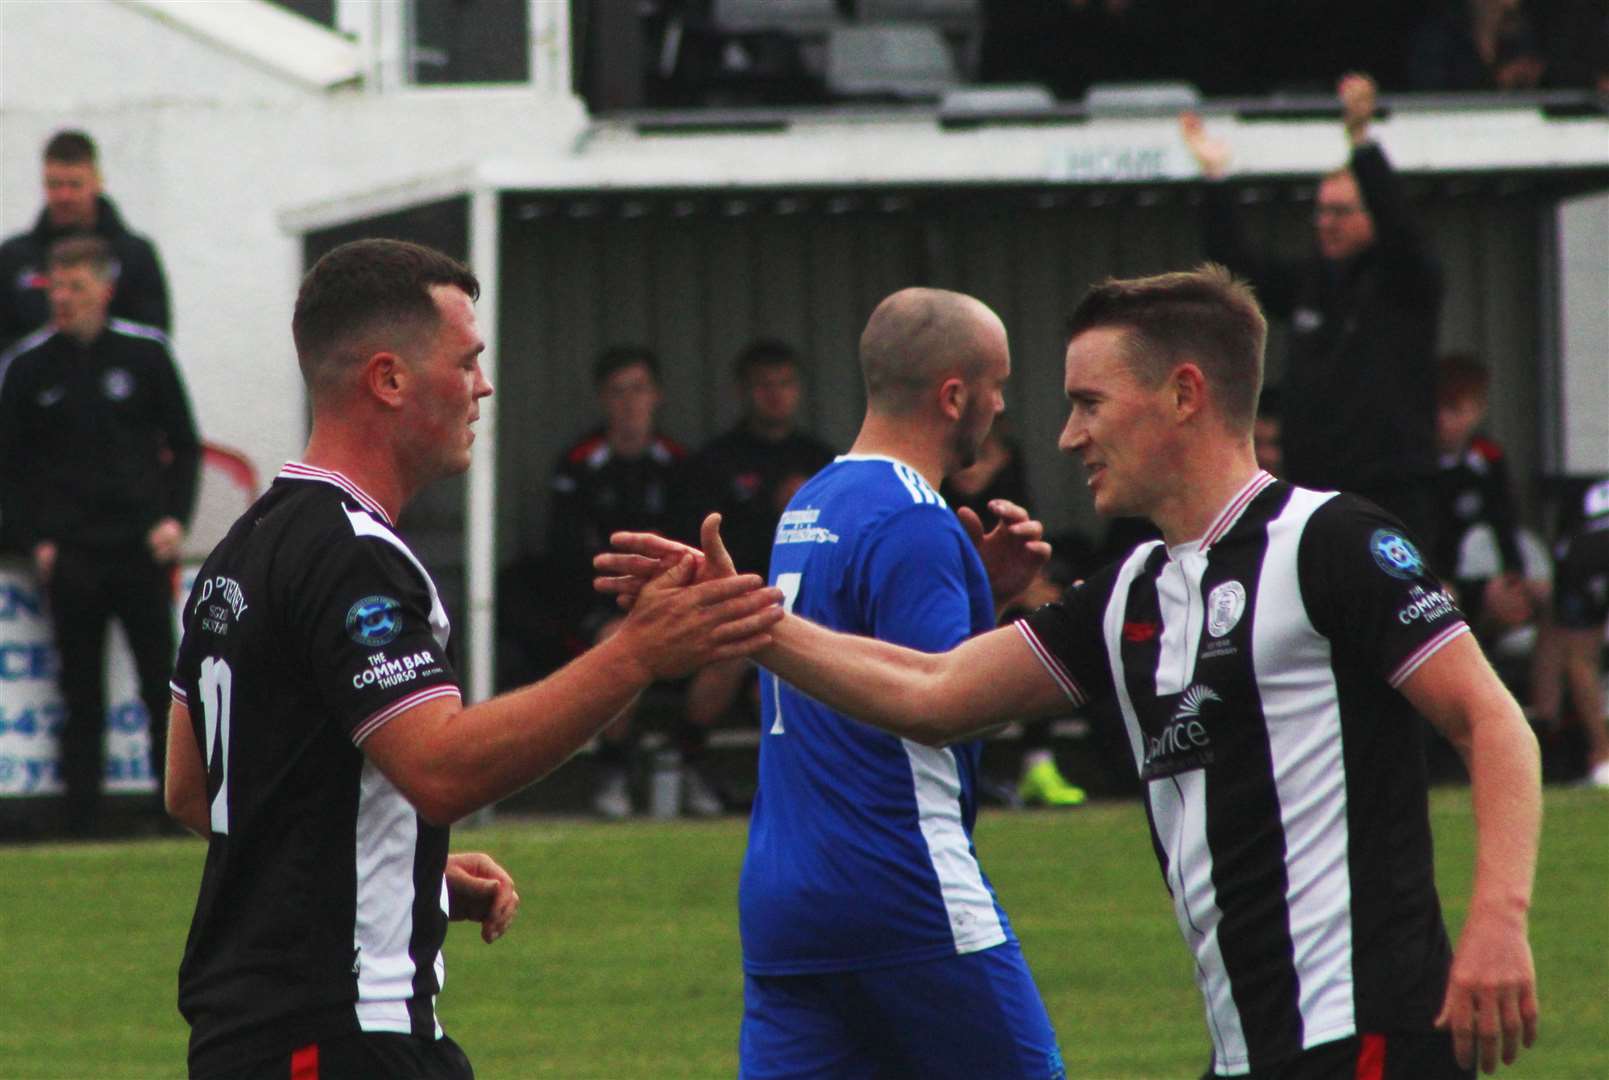 Gordon MacNab is congratulated by Gary Manson after the striker netted Academy's fourth goal.